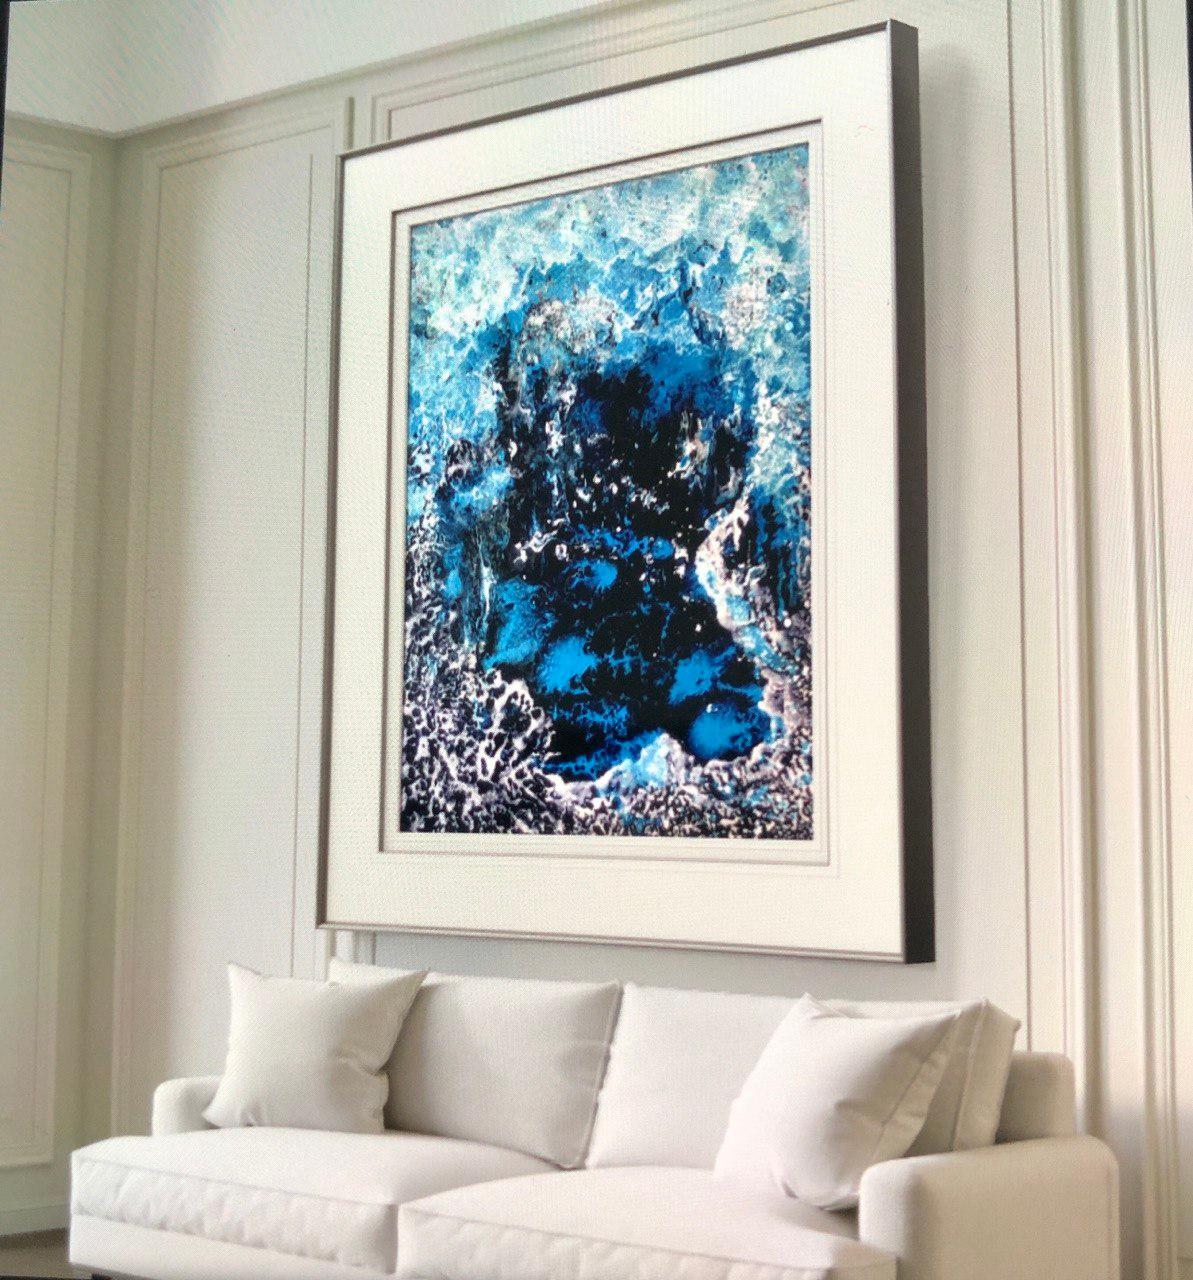 Vik Schroeder  Interior Painting - Looking into the Depth. Abstract Lage painting / Water/ Sea / Blue / White 